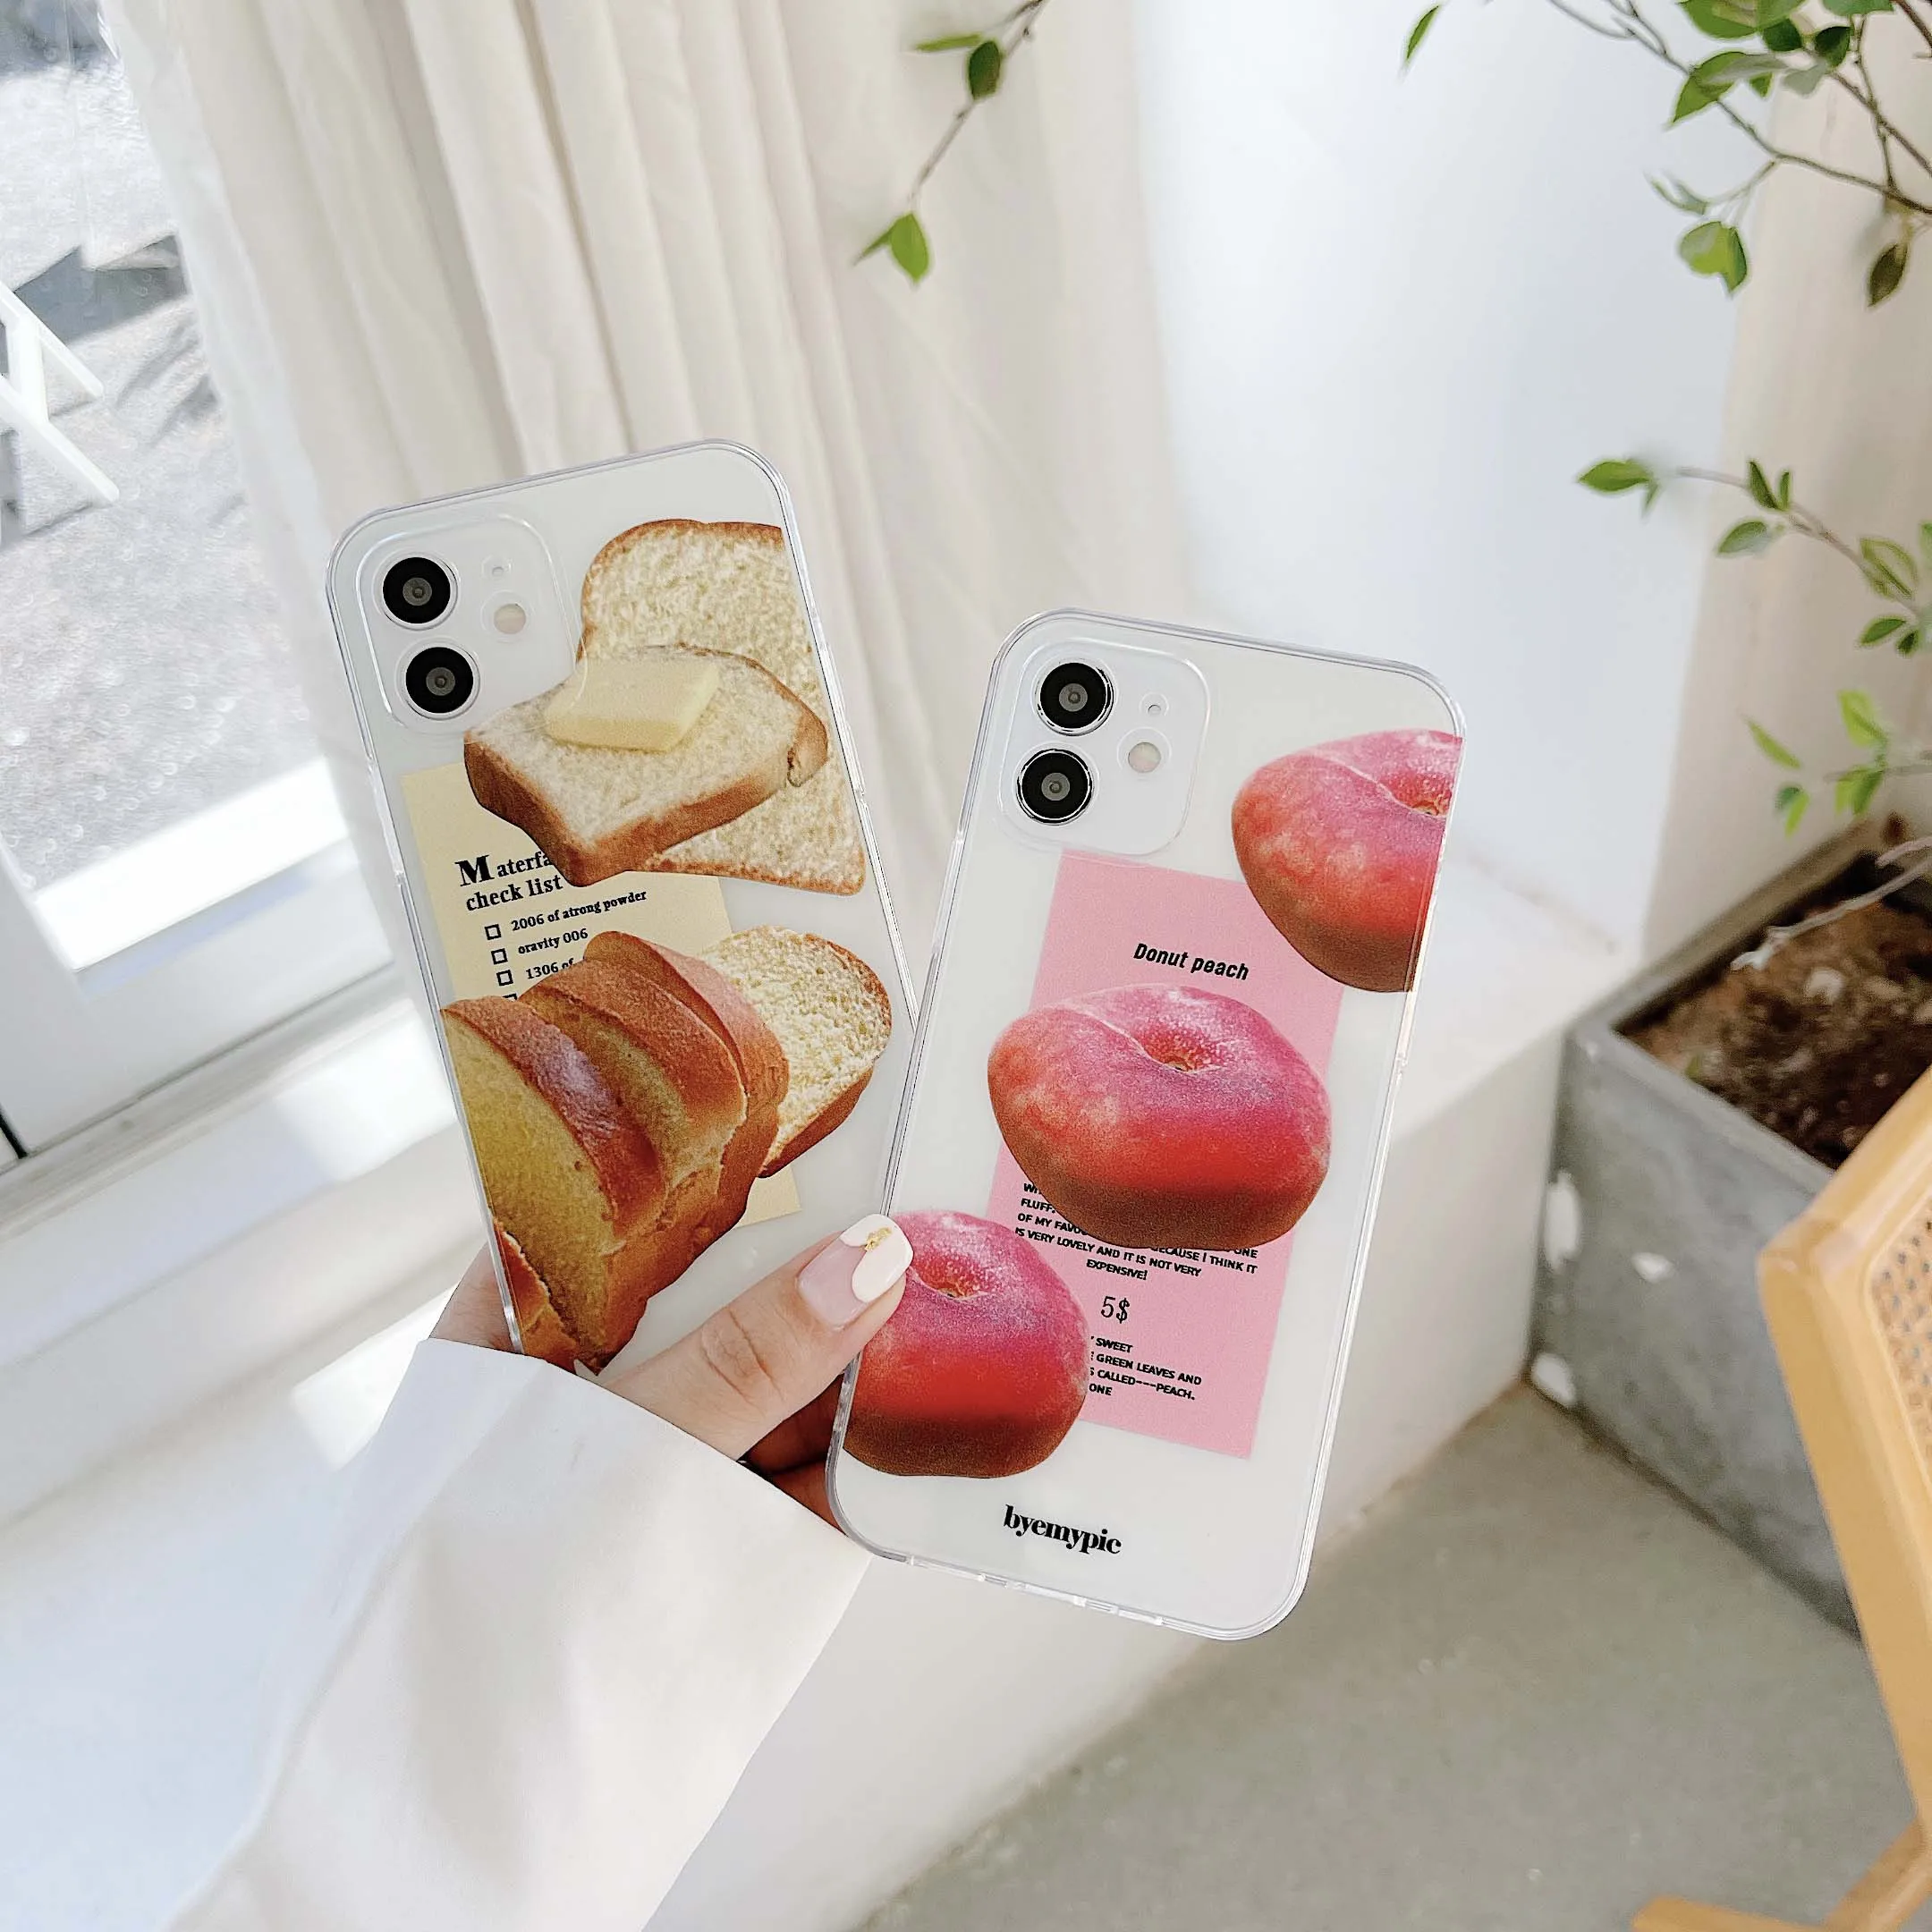 

Butter Bread Cute Cover for Google Pixel 6 PRO 3 3a 4 5 2 XL Soft Silicone Case for Google Pixel 6 4a 5a 5G 3aXL 2XL Back Cover